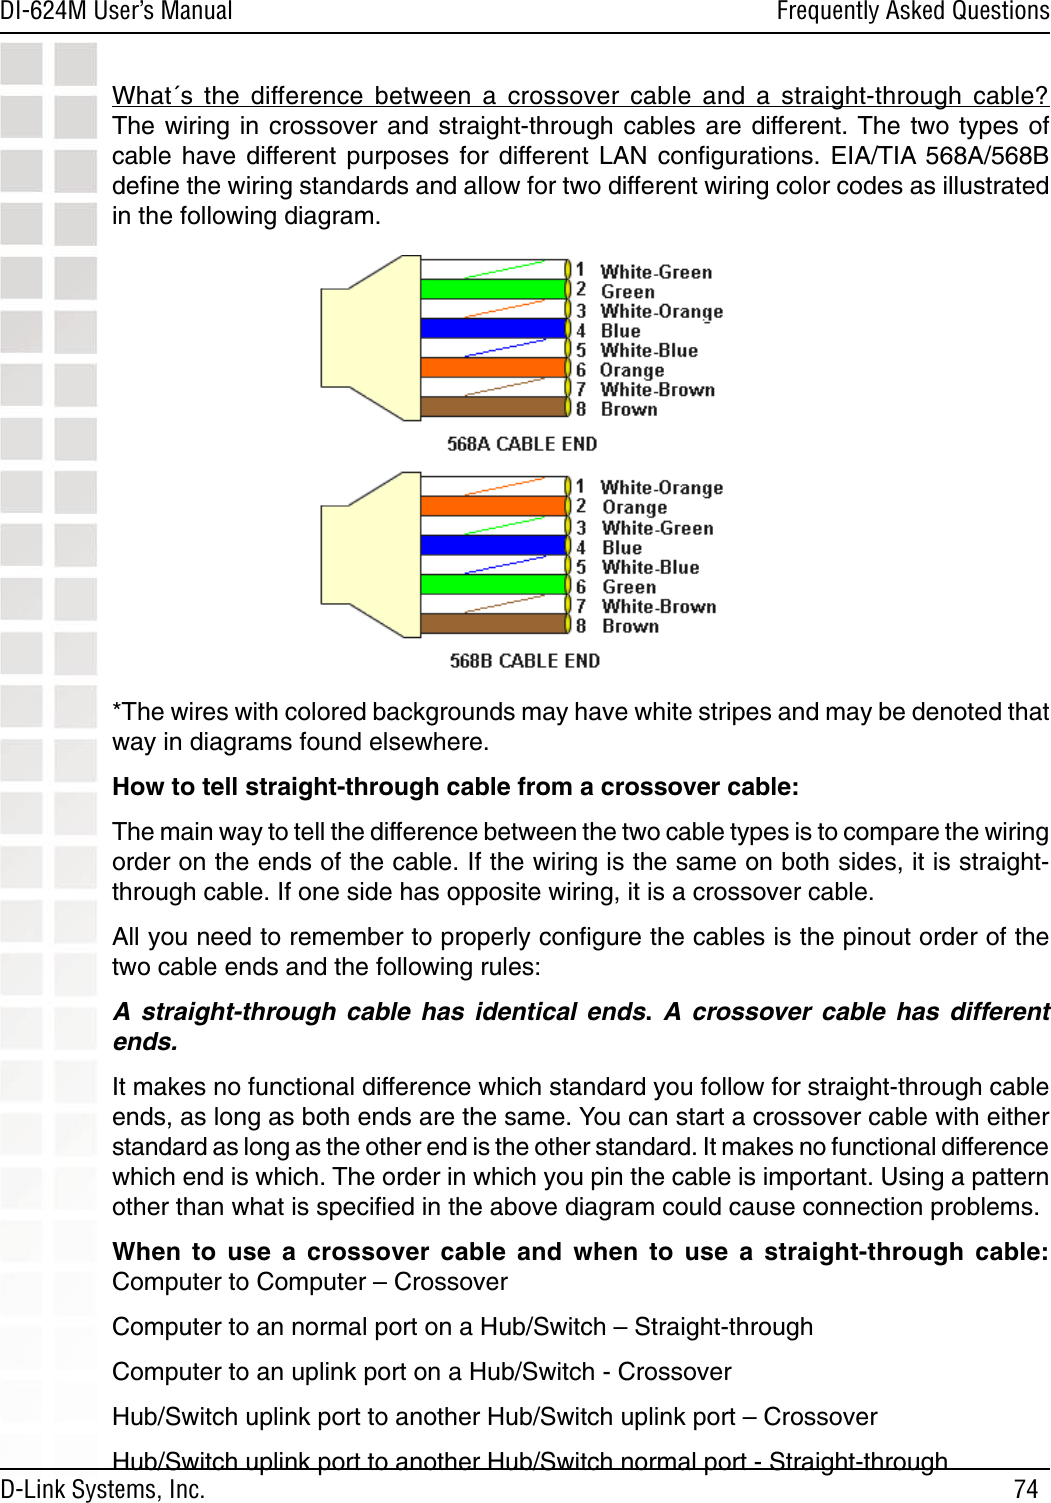 74DI-624M User’s Manual D-Link Systems, Inc.Frequently Asked QuestionsWhat´s  the  difference  between  a  crossover  cable  and  a  straight-through  cable?  The wiring in  crossover and straight-through  cables are different. The two  types  of cable  have  different  purposes  for  different  LAN  conﬁgurations.  EIA/TIA  568A/568B deﬁne the wiring standards and allow for two different wiring color codes as illustrated in the following diagram.  *The wires with colored backgrounds may have white stripes and may be denoted that way in diagrams found elsewhere.How to tell straight-through cable from a crossover cable:The main way to tell the difference between the two cable types is to compare the wiring order on the ends of the cable. If the wiring is the same on both sides, it is straight-through cable. If one side has opposite wiring, it is a crossover cable.All you need to remember to properly conﬁgure the cables is the pinout order of the two cable ends and the following rules:A  straight-through  cable  has  identical  ends.  A  crossover  cable  has  different ends.It makes no functional difference which standard you follow for straight-through cable ends, as long as both ends are the same. You can start a crossover cable with either standard as long as the other end is the other standard. It makes no functional difference which end is which. The order in which you pin the cable is important. Using a pattern other than what is speciﬁed in the above diagram could cause connection problems.When  to  use  a  crossover  cable  and  when  to  use  a  straight-through  cable: Computer to Computer – CrossoverComputer to an normal port on a Hub/Switch – Straight-throughComputer to an uplink port on a Hub/Switch - CrossoverHub/Switch uplink port to another Hub/Switch uplink port – CrossoverHub/Switch uplink port to another Hub/Switch normal port - Straight-through 